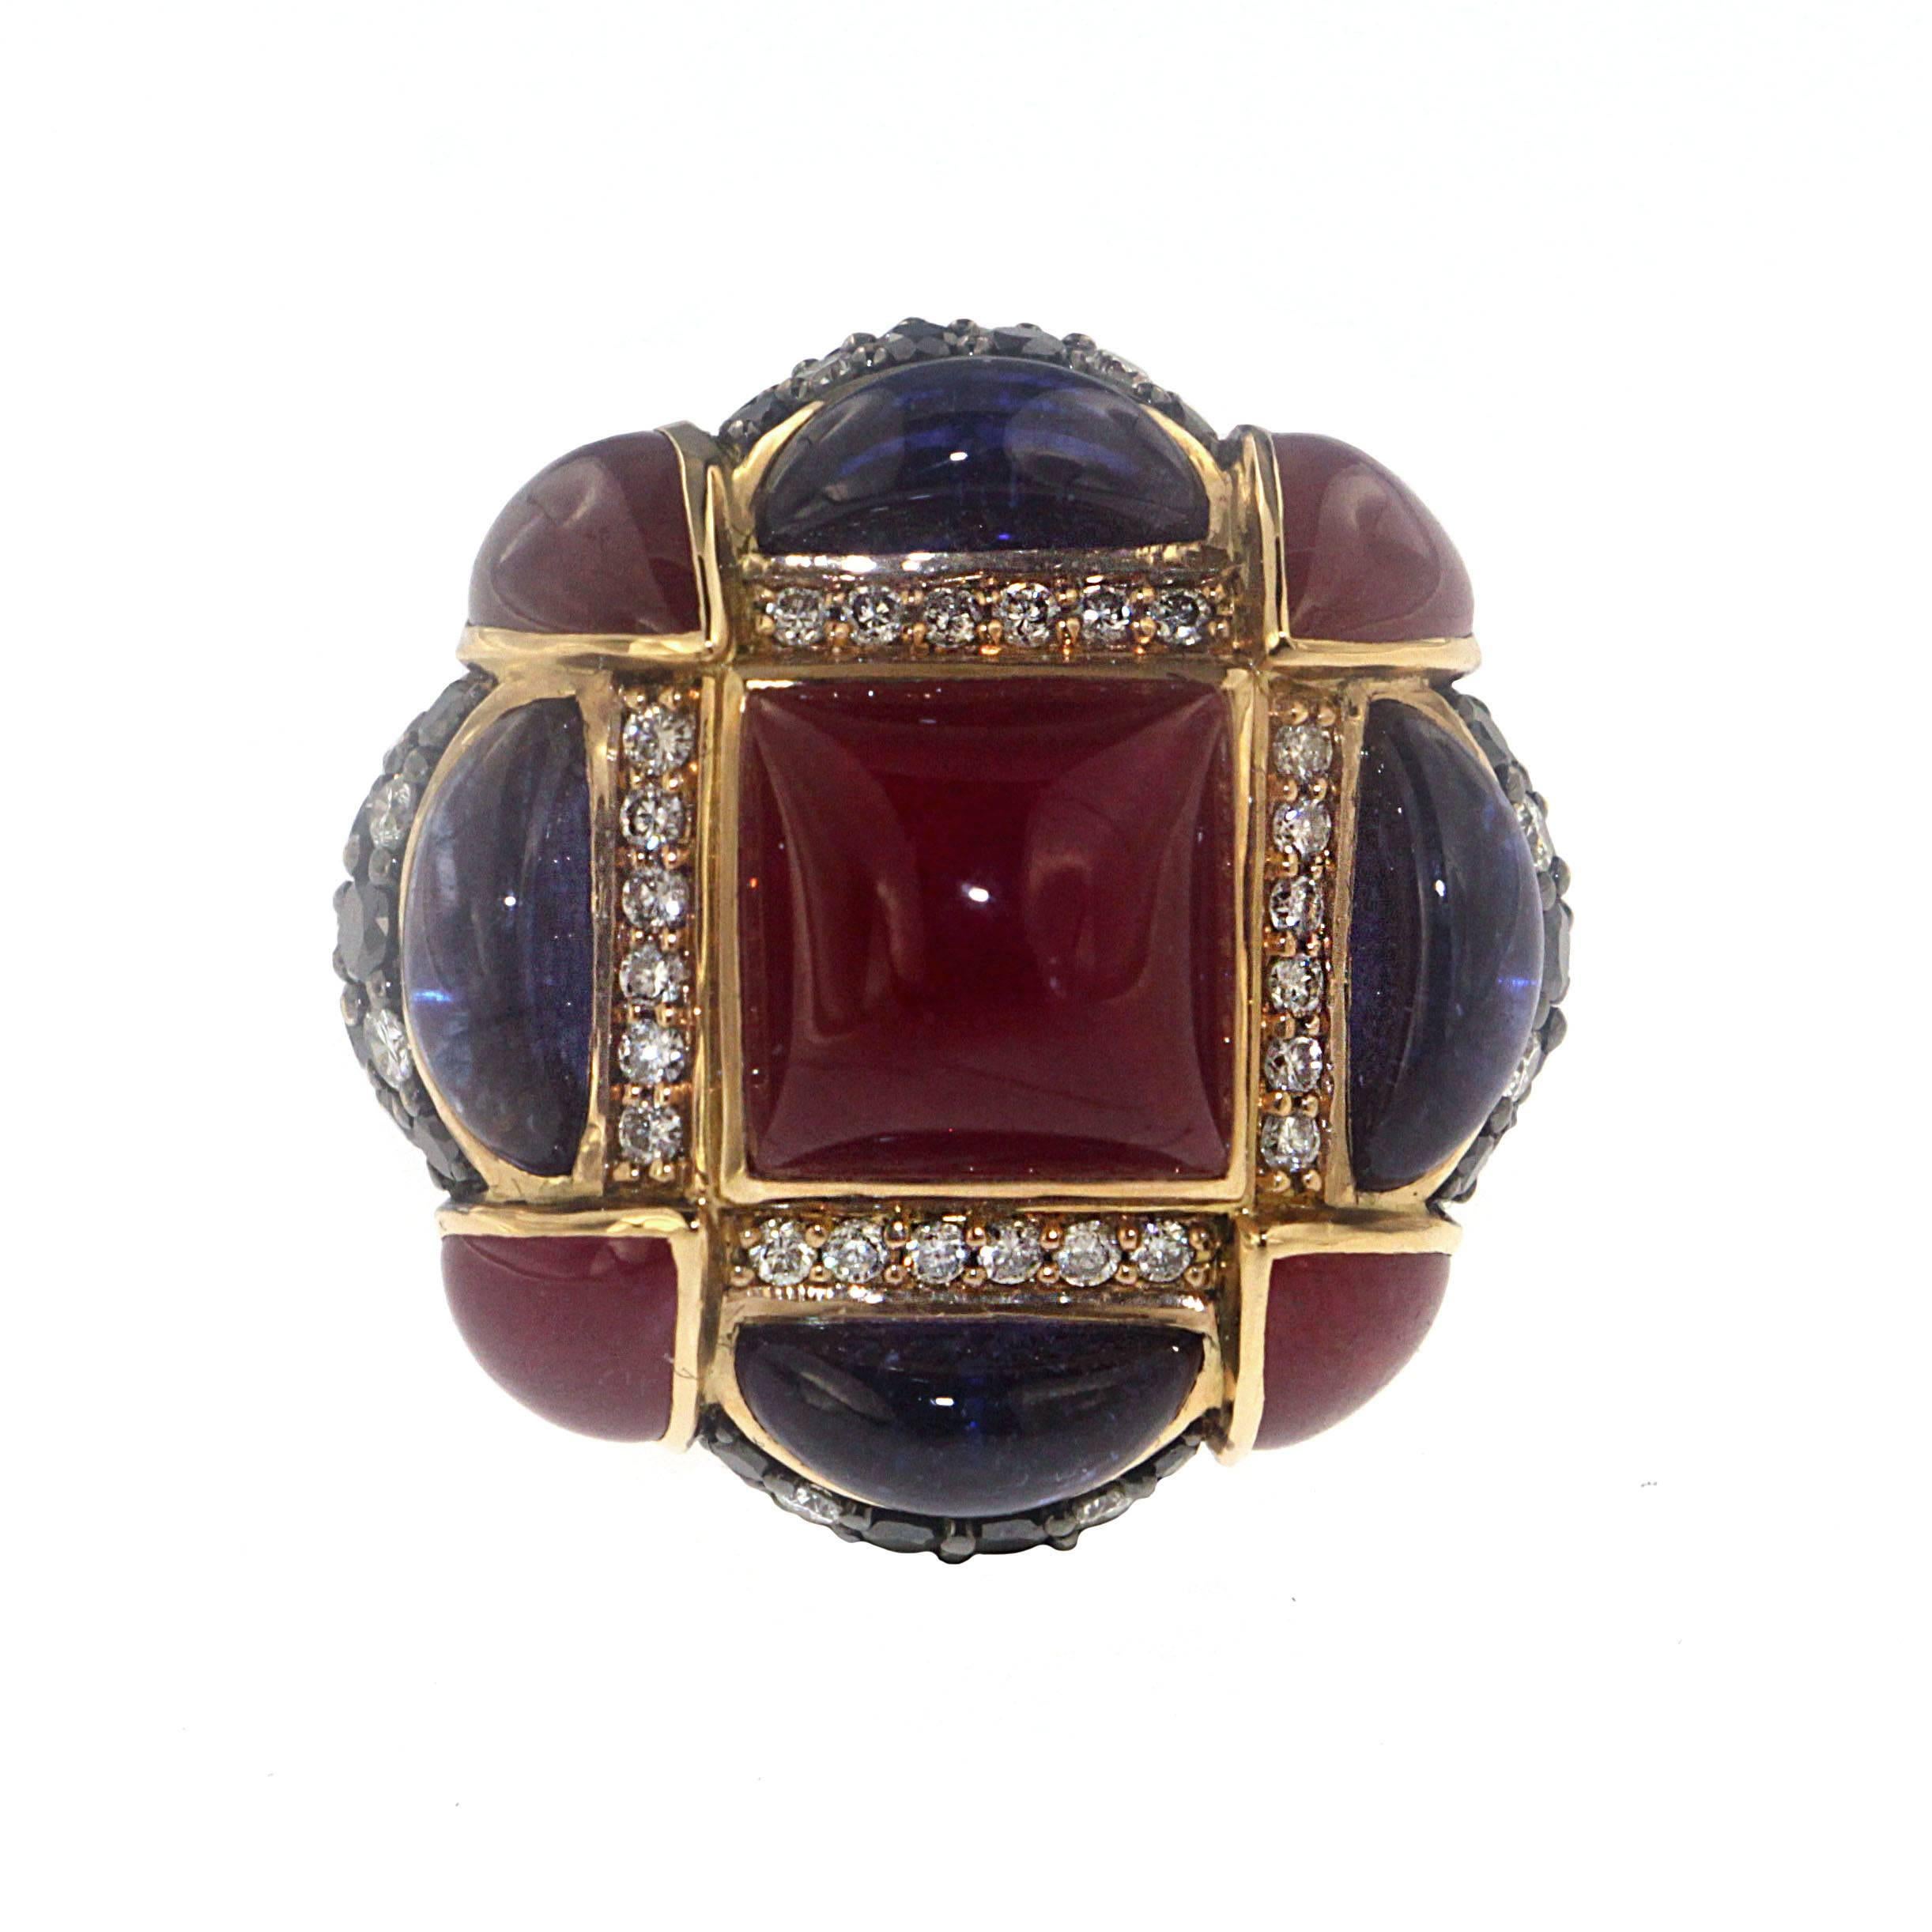 Rule your own personal kingdom with the Lady Czar ring, a Zorab Creation. 

With 18.22 carats of rubies, 6.39 carats of blue sapphires, 2.03 carats of black diamonds, and 0.84 carats of white diamonds, this is a power ring with a serious nod to